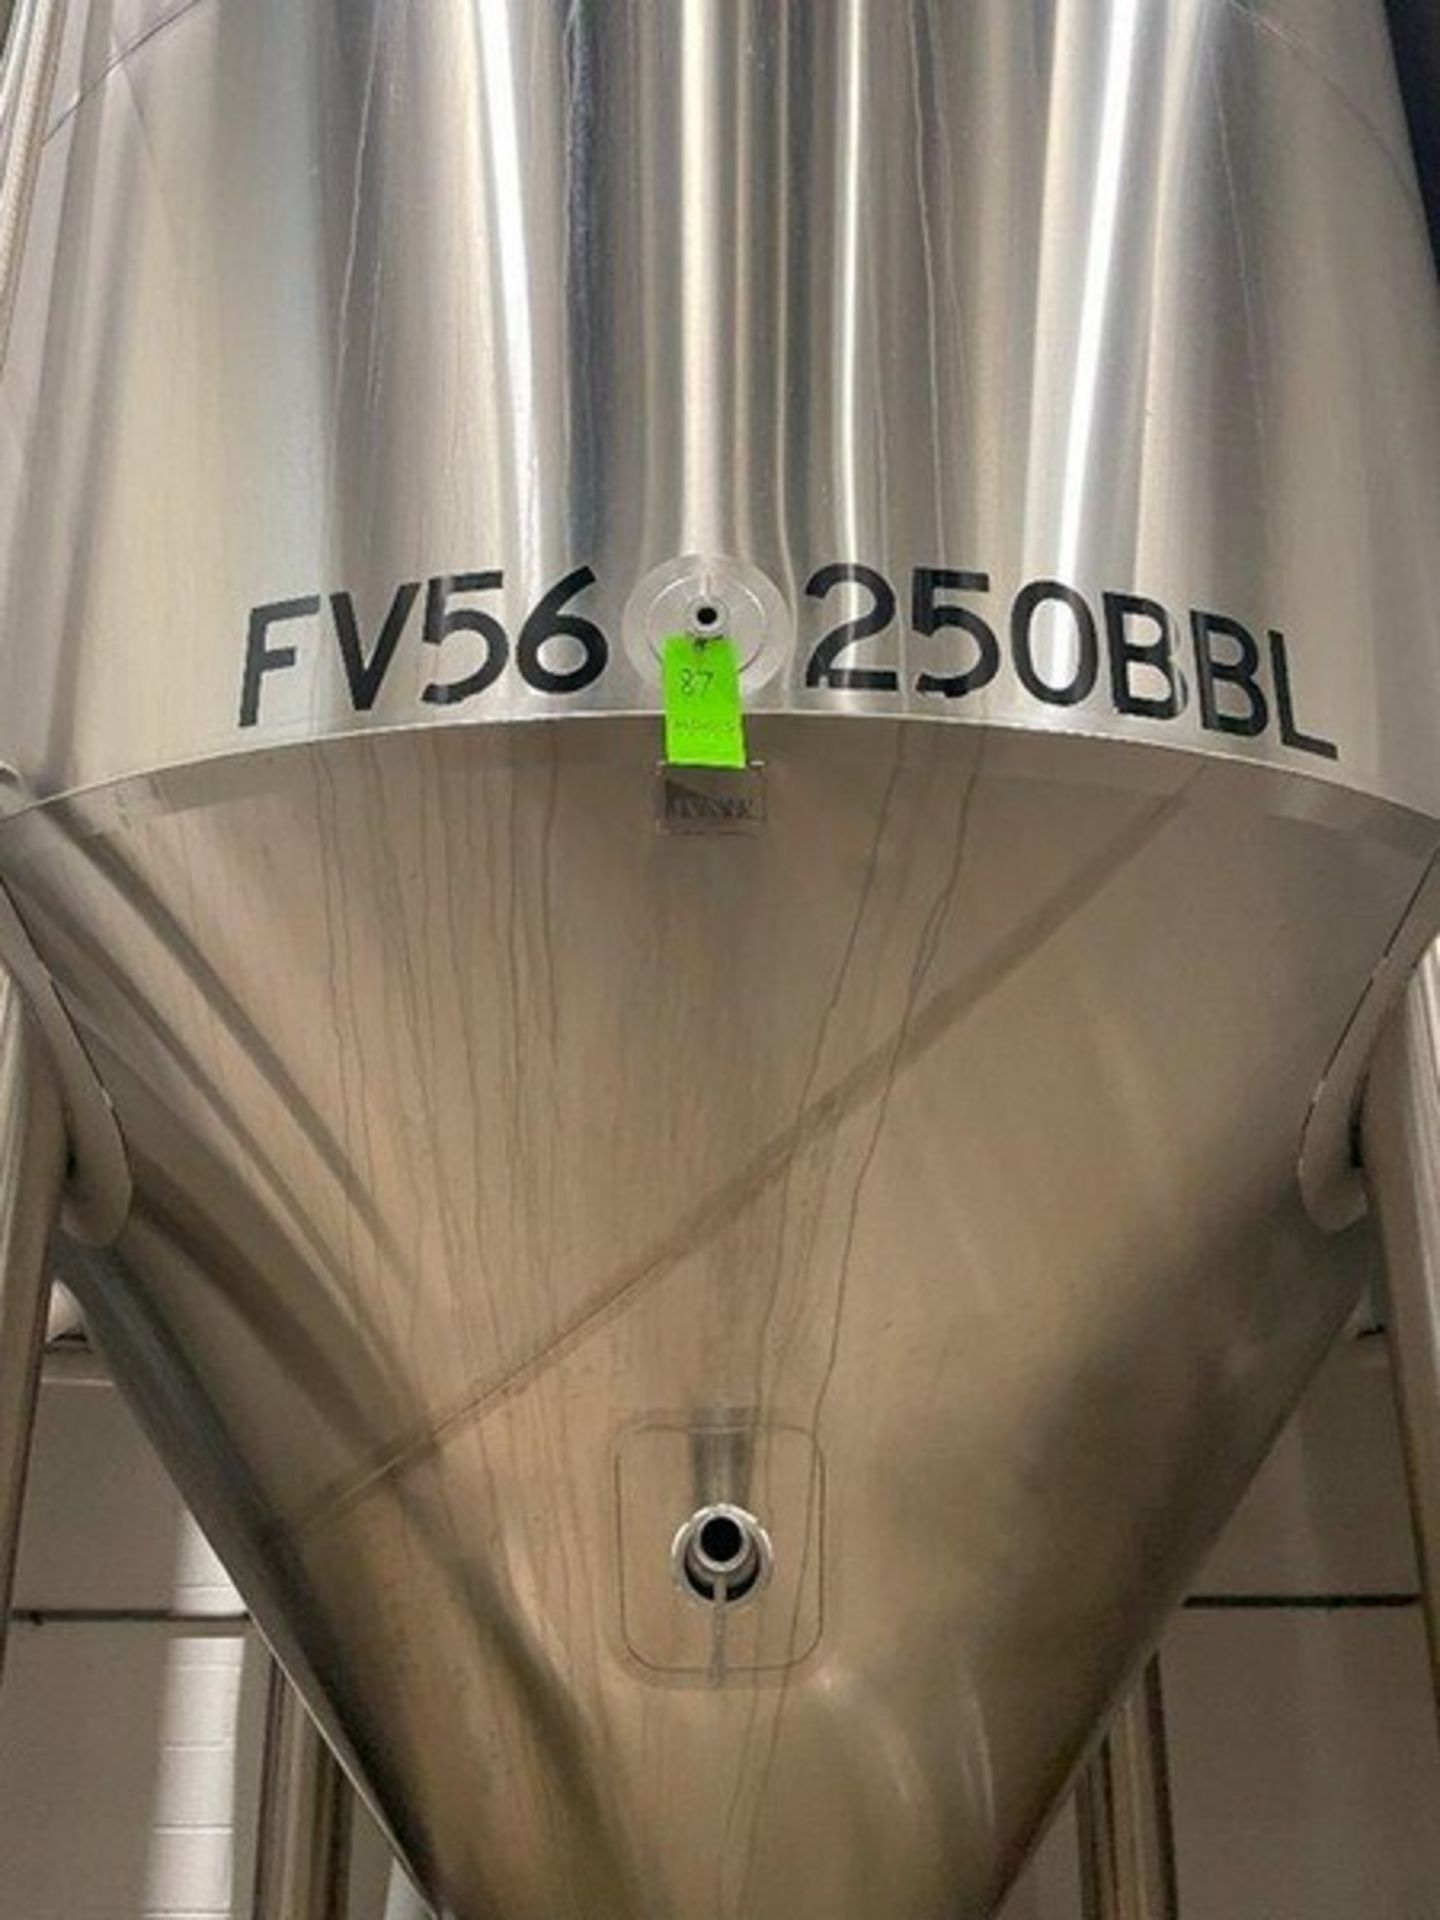 250 BBL (10178 Gallon) Vertical Cone Bottom 304 Stainless Steel Jacketed Vessel. Manufactured by JV - Image 7 of 8